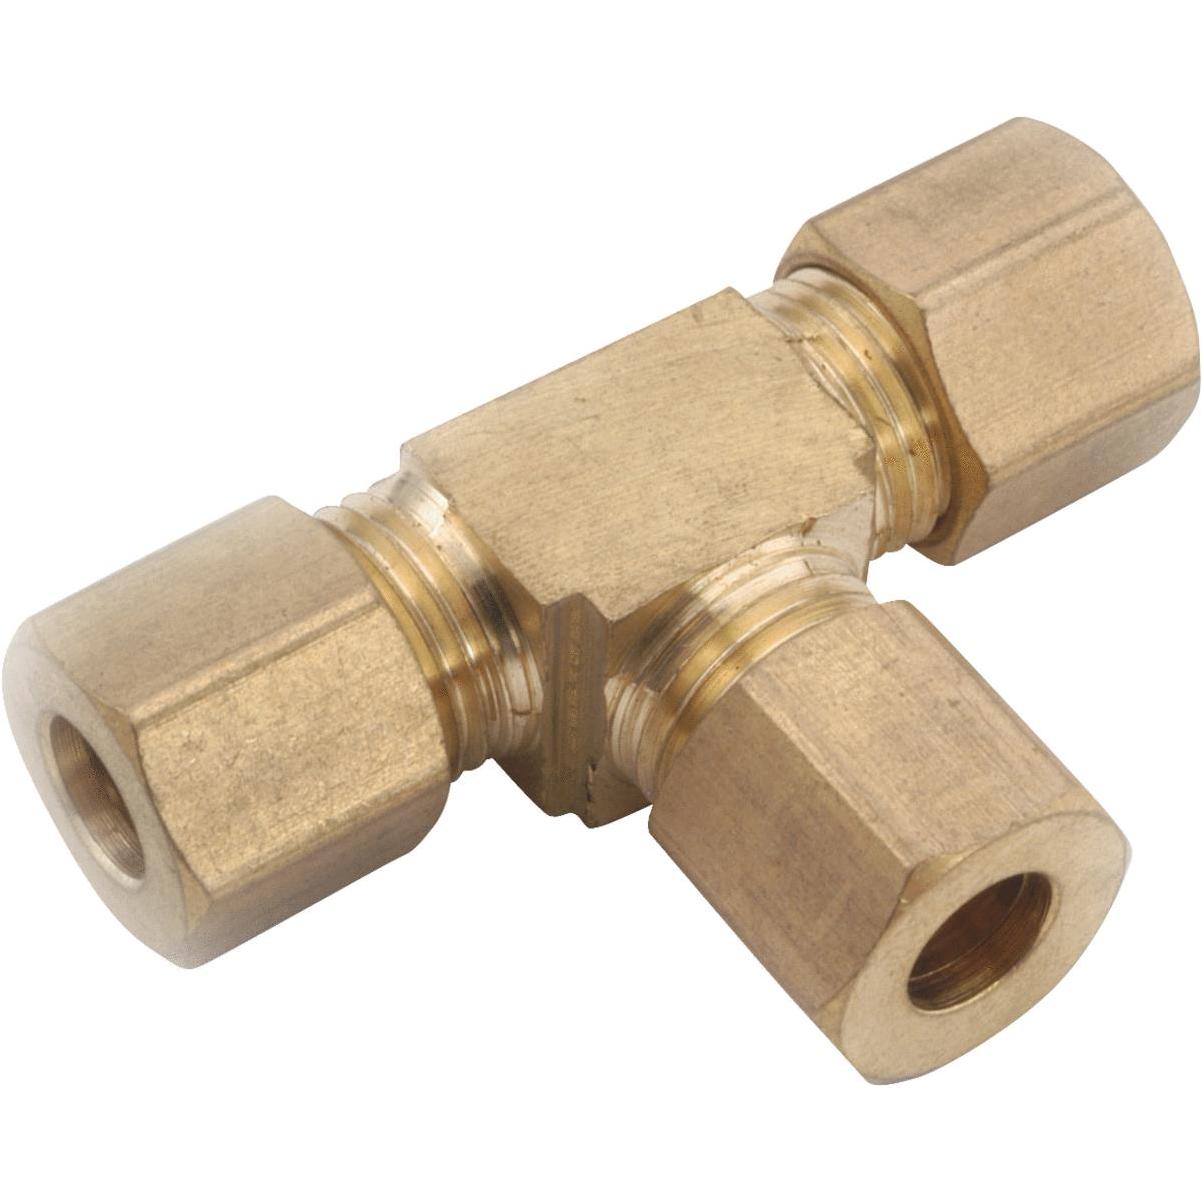 Union Tee Compression, Brass, 1/4, Bag of 1